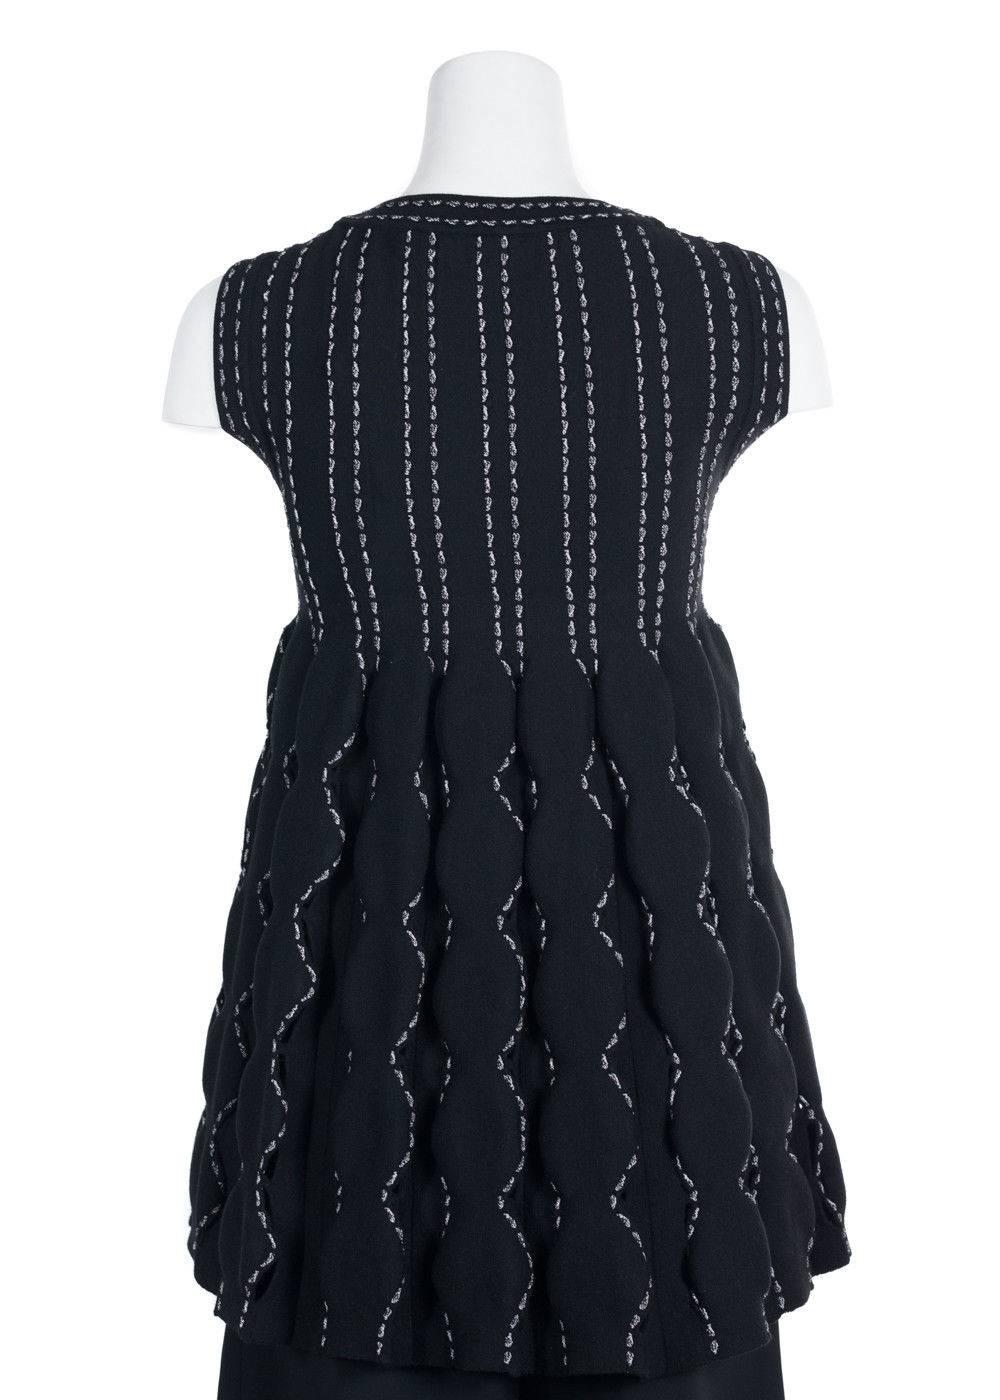 Alaia Women's Black Wool Blend Contrast Stitched Sleeveless Top For Sale 1